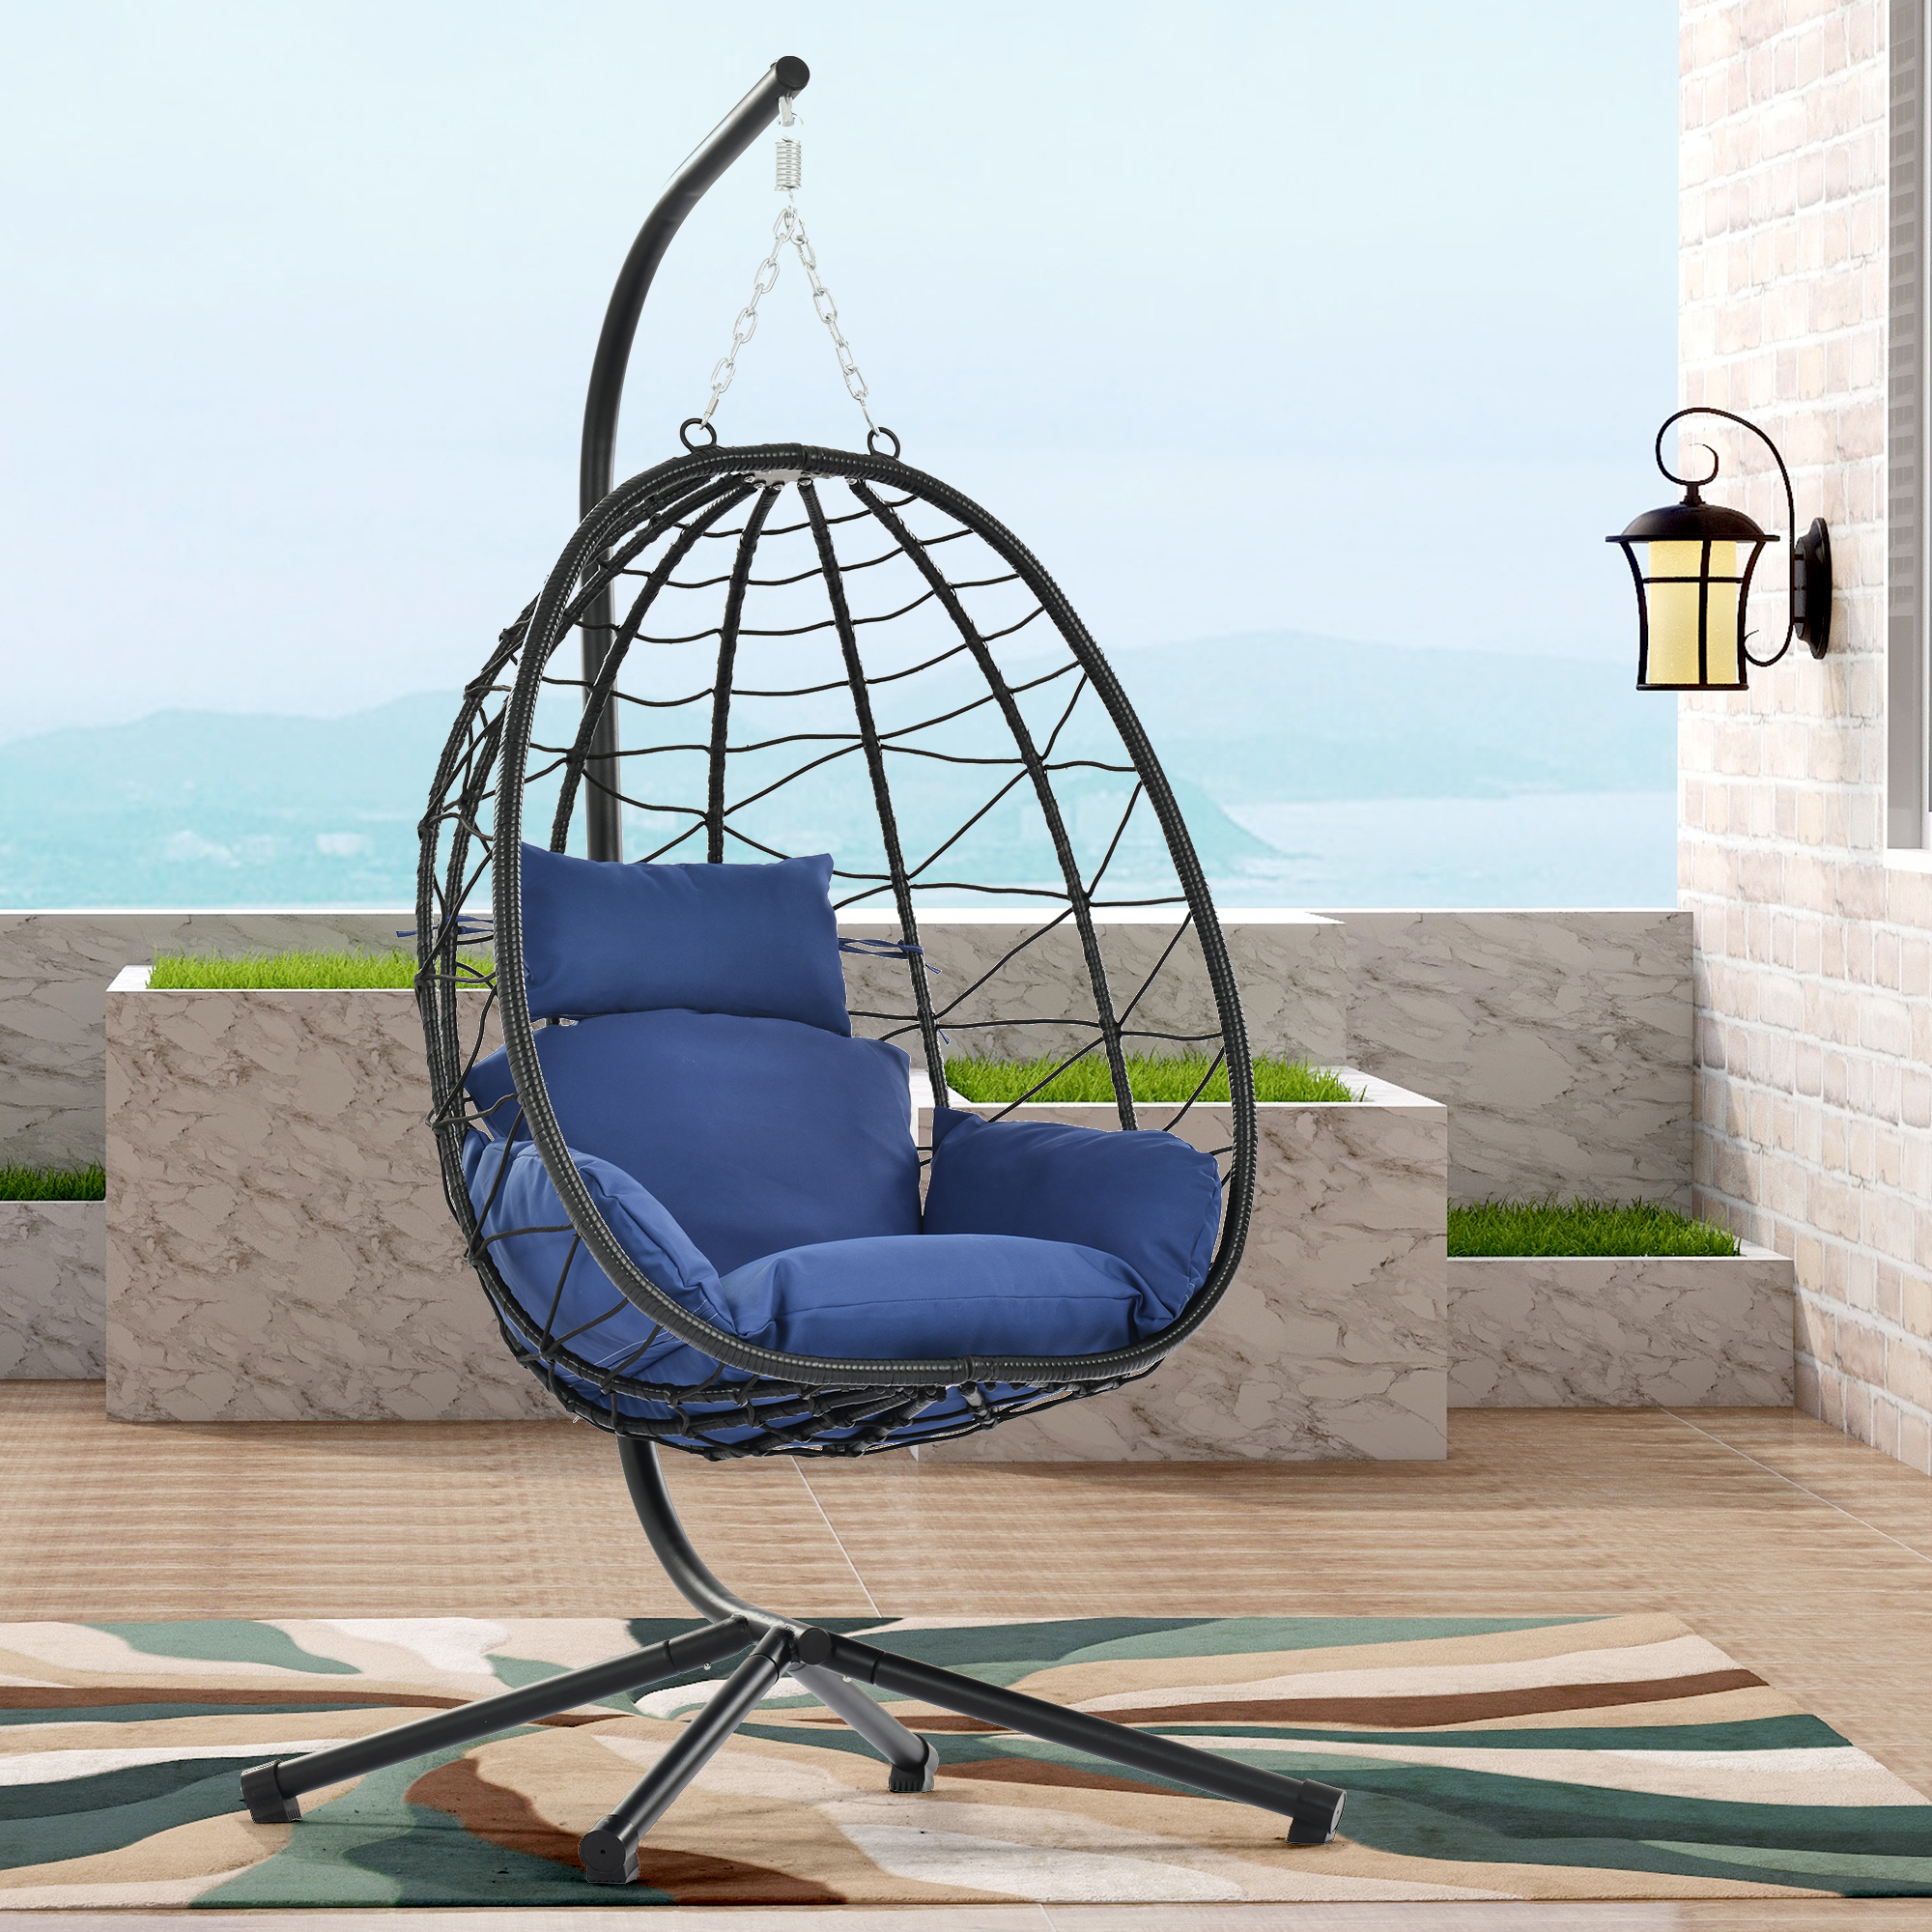 Wicker Hanging Egg Chair with Stand, Hammock Egg Chairs with Hanging Kits, Soft Cushion & Pillow, Large Swing Lounge Chair, Outdoor Indoor Patio Balcony Bedroom Relaxing Basket Chair, B054 - image 1 of 9